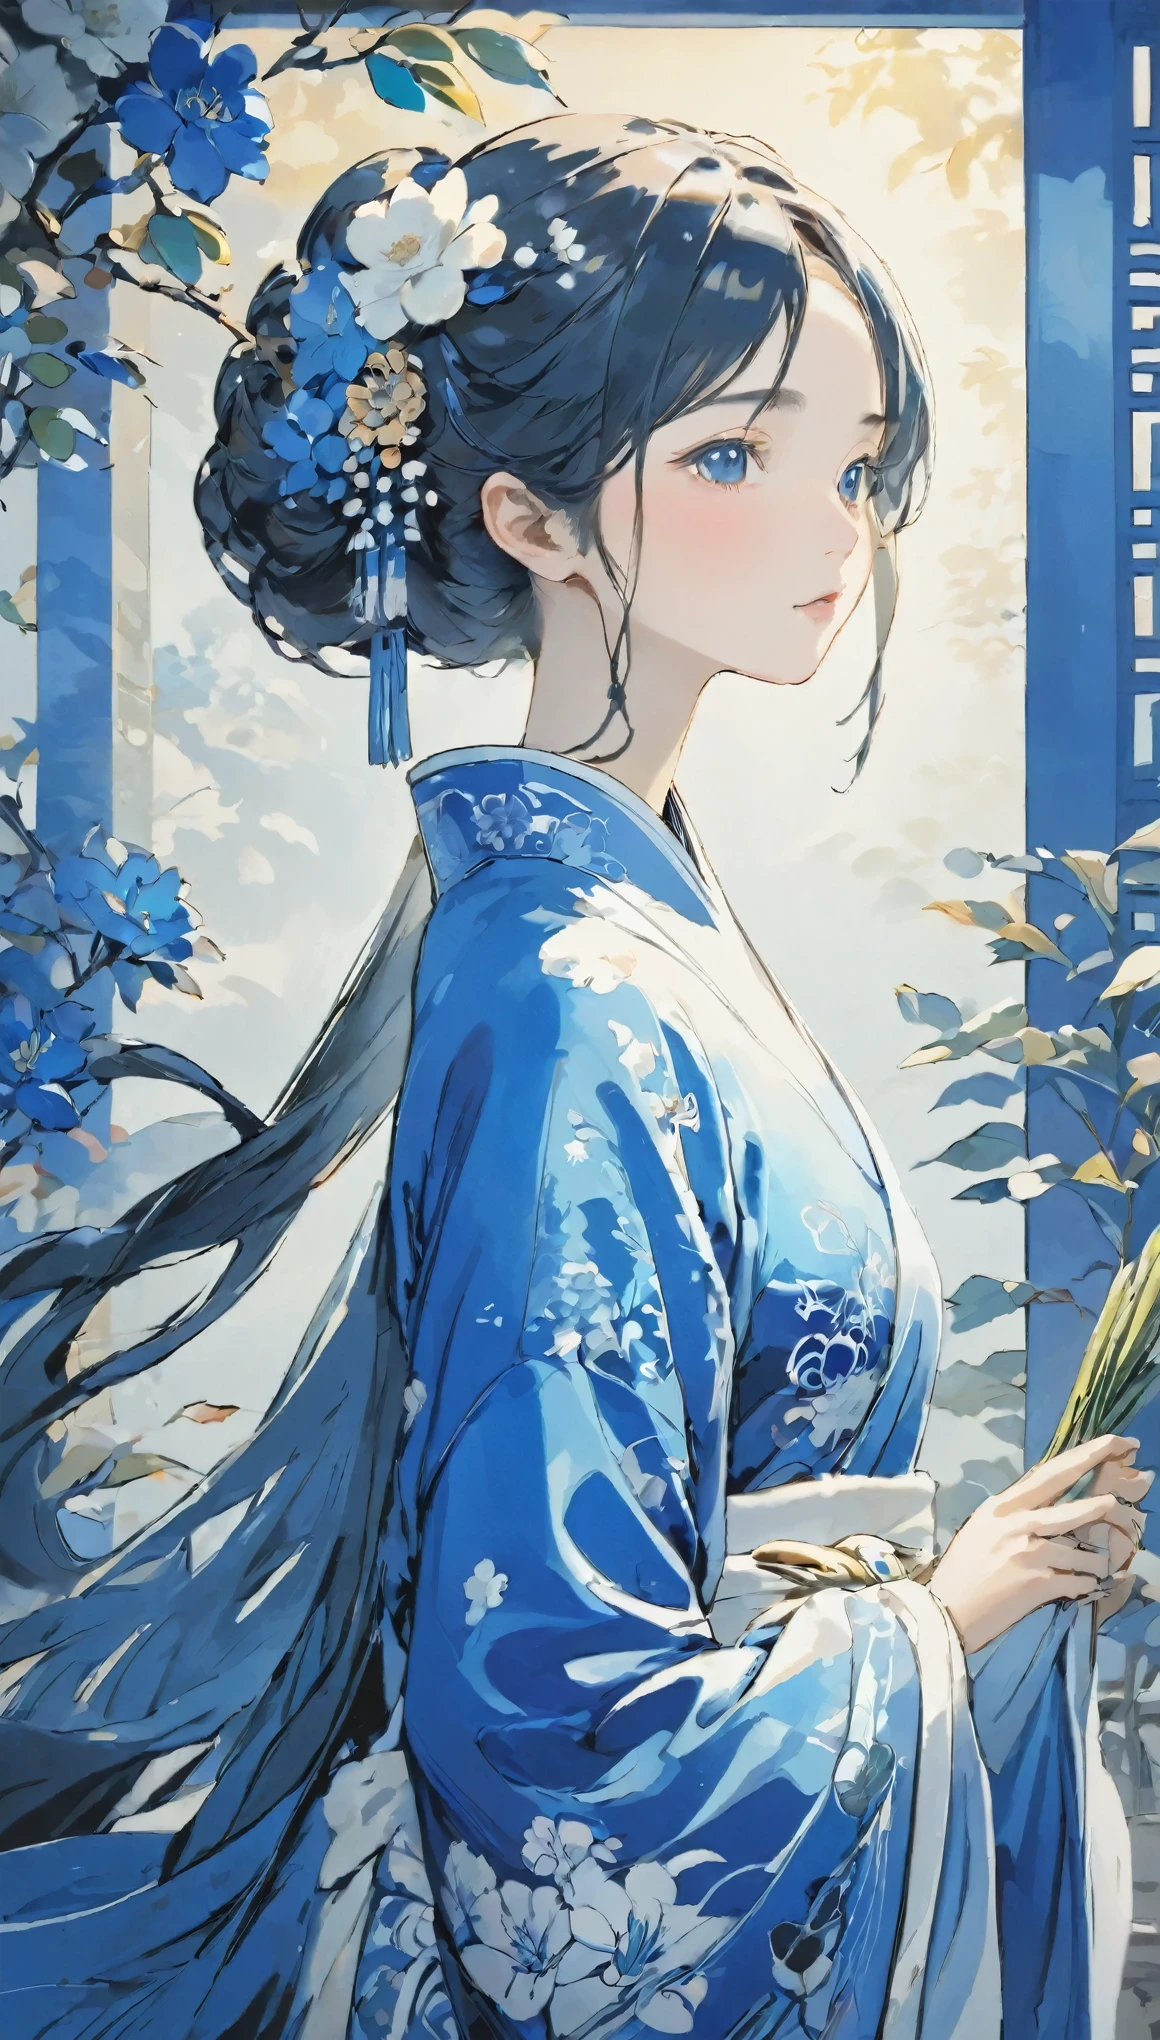 picture，Blue and white dress，Woman with flowers in her hair，Blue and white porcelain style，Hanfu girl，chinese art style，Beautiful character picture，Chinese picture painting style，It has a Chinese aesthetic.，Chinese style，Beautiful artwork illustration，traditional chinese art，Oriental art style，Blue and White Porcelain Exhibition，Beautiful anime portrait character composition in the bottom left corner，The upper right corner is decorated with a blue and white porcelain background，（Loss of focus，Out of focus，Soft Lighting，Light，Skylight，hyper HD）